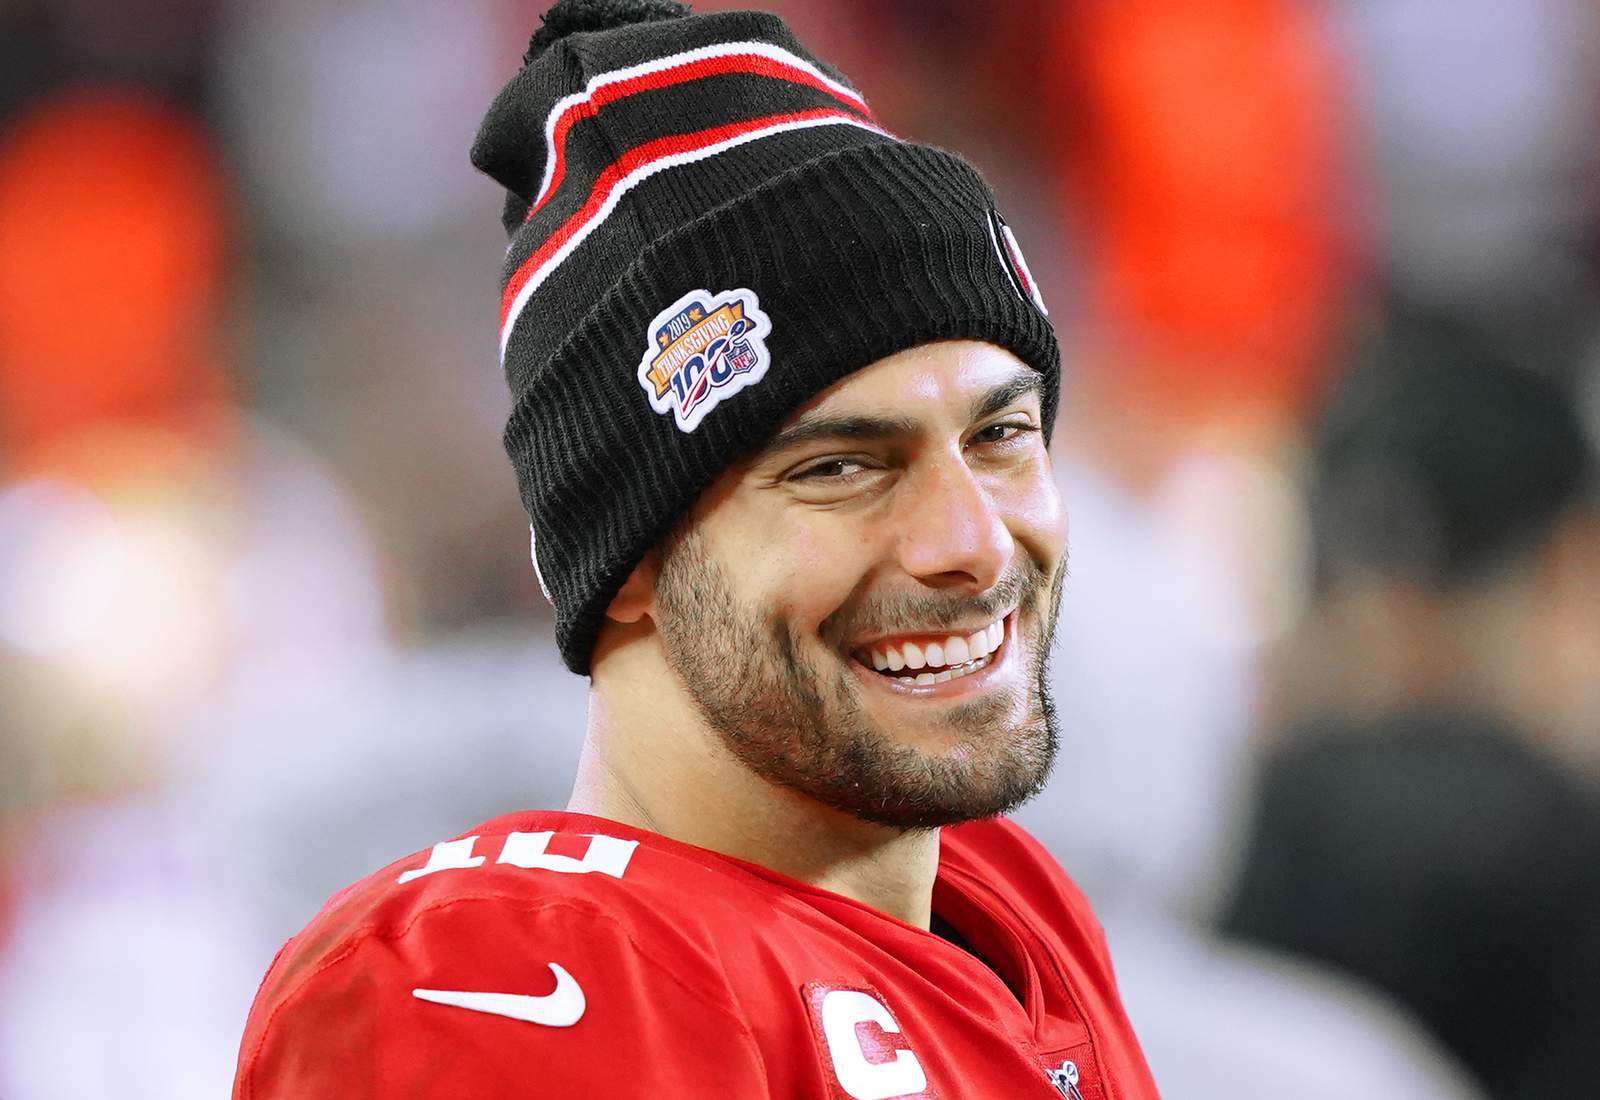 5 things about 49ers’ Jimmy Garoppolo you probably didn’t know